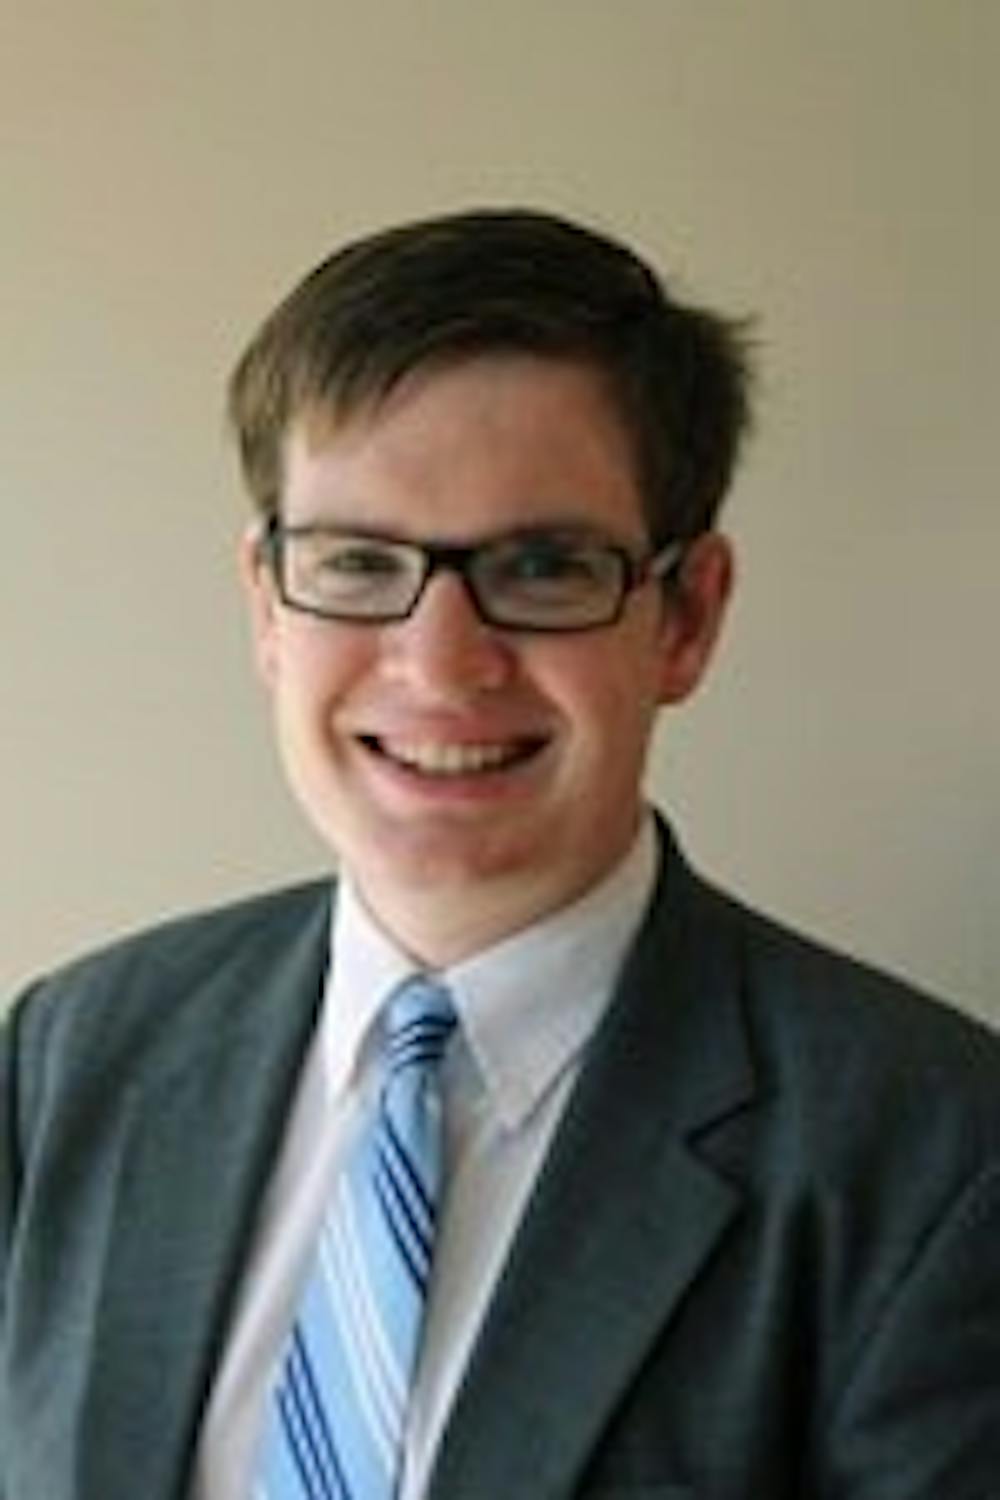 Lee Storrow is a Chapel Hill Town Counci member and a 2011 graduate of UNC.